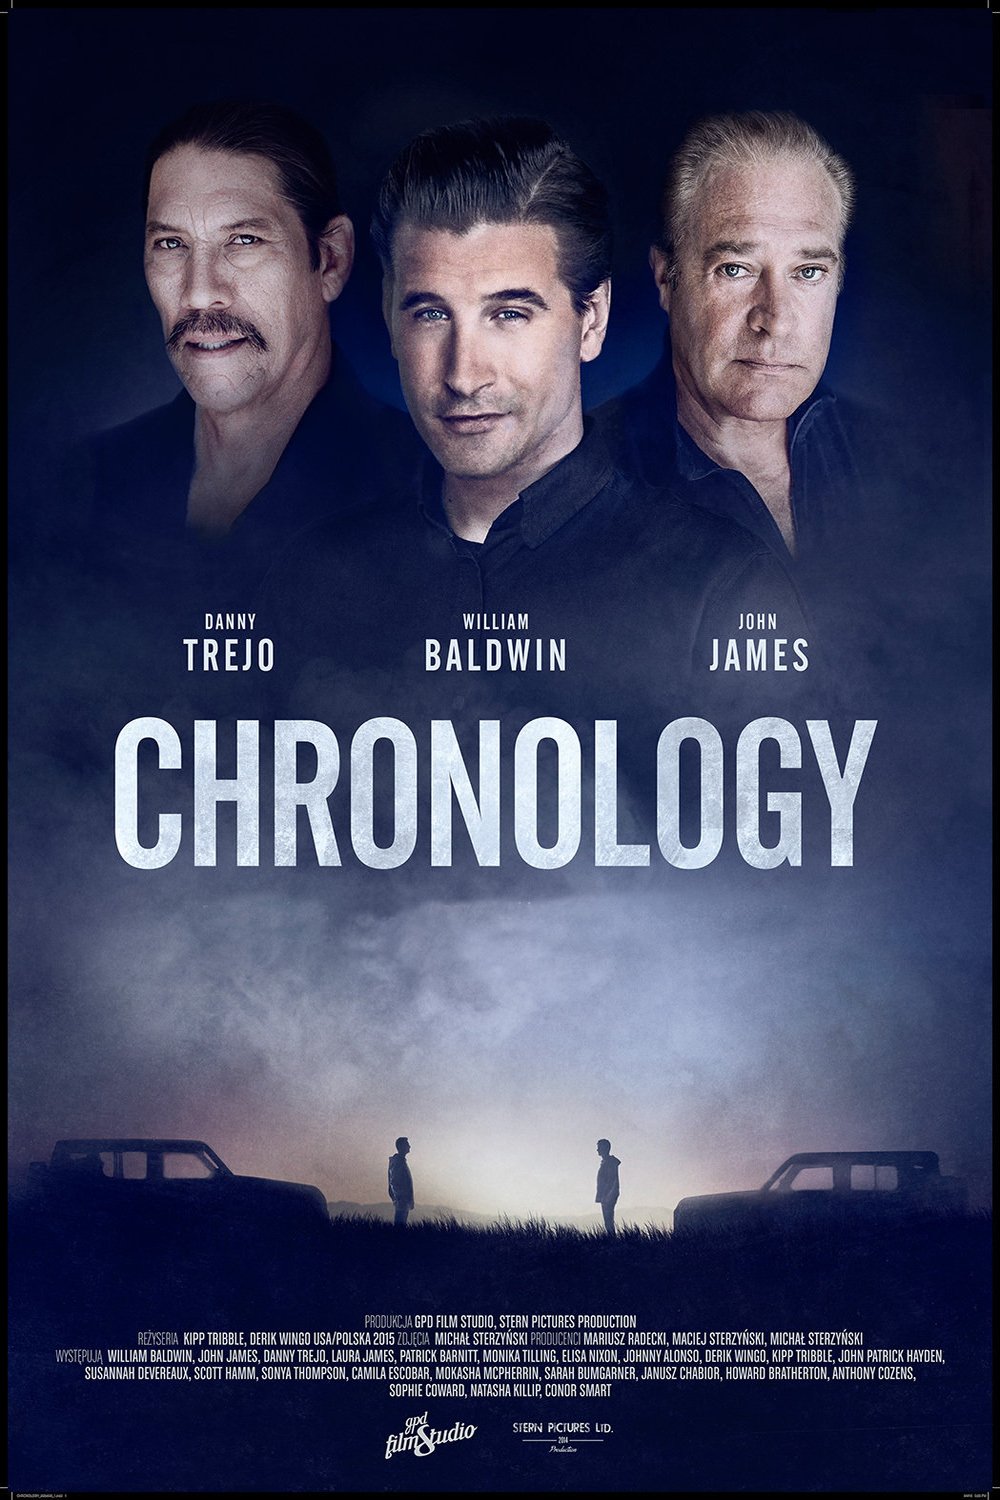 Poster of the movie Chronology